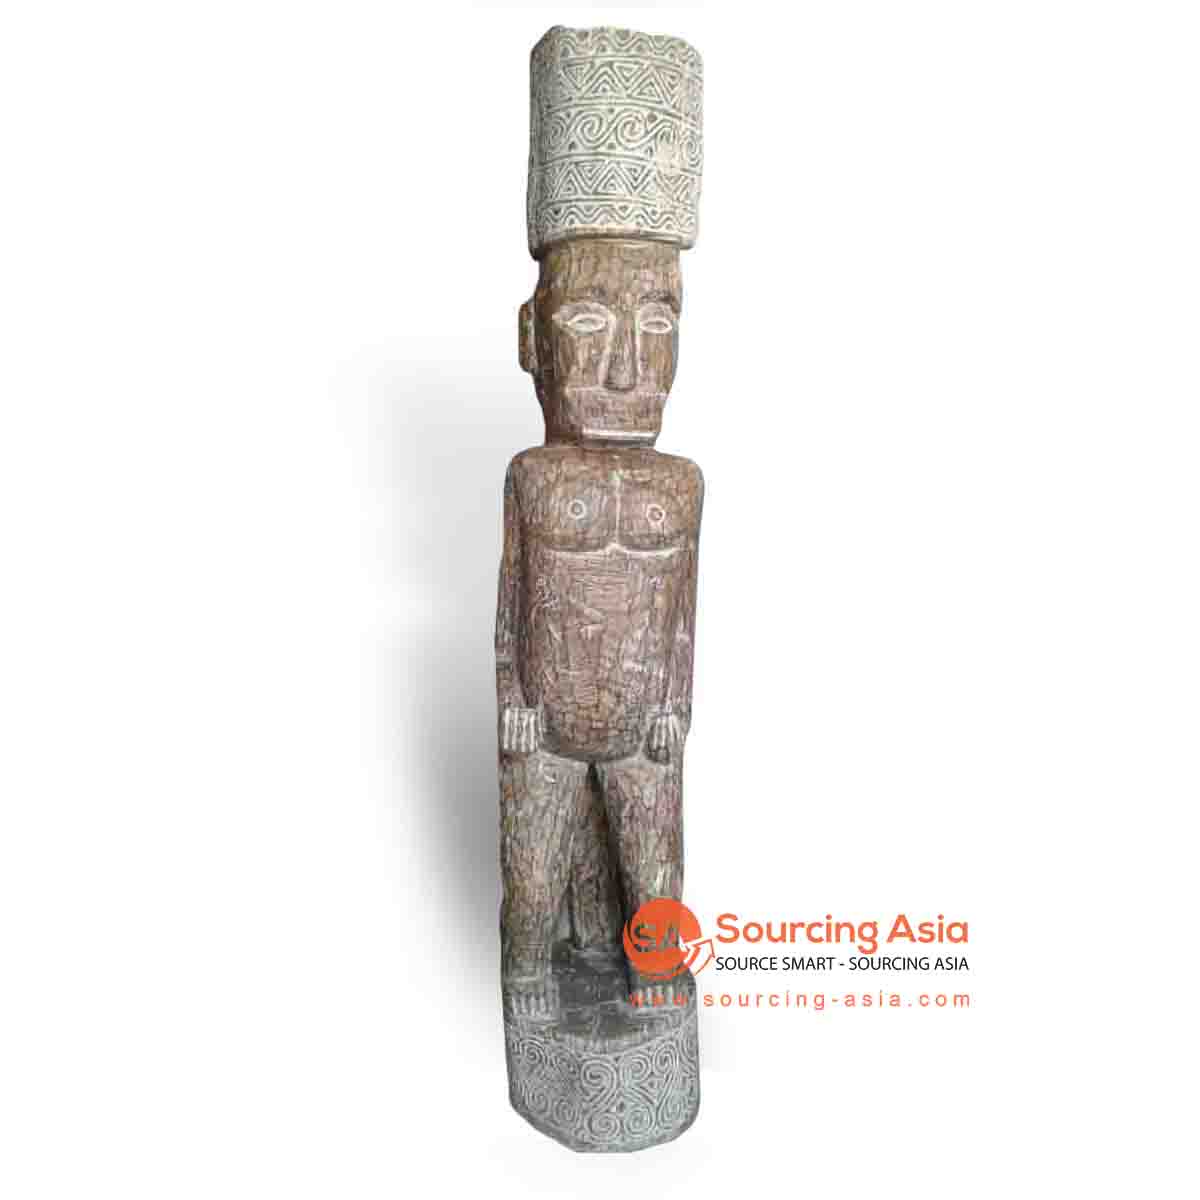 VICT033 WOODEN ASHMAT FIGURE STATUE ON STAND DECORATION